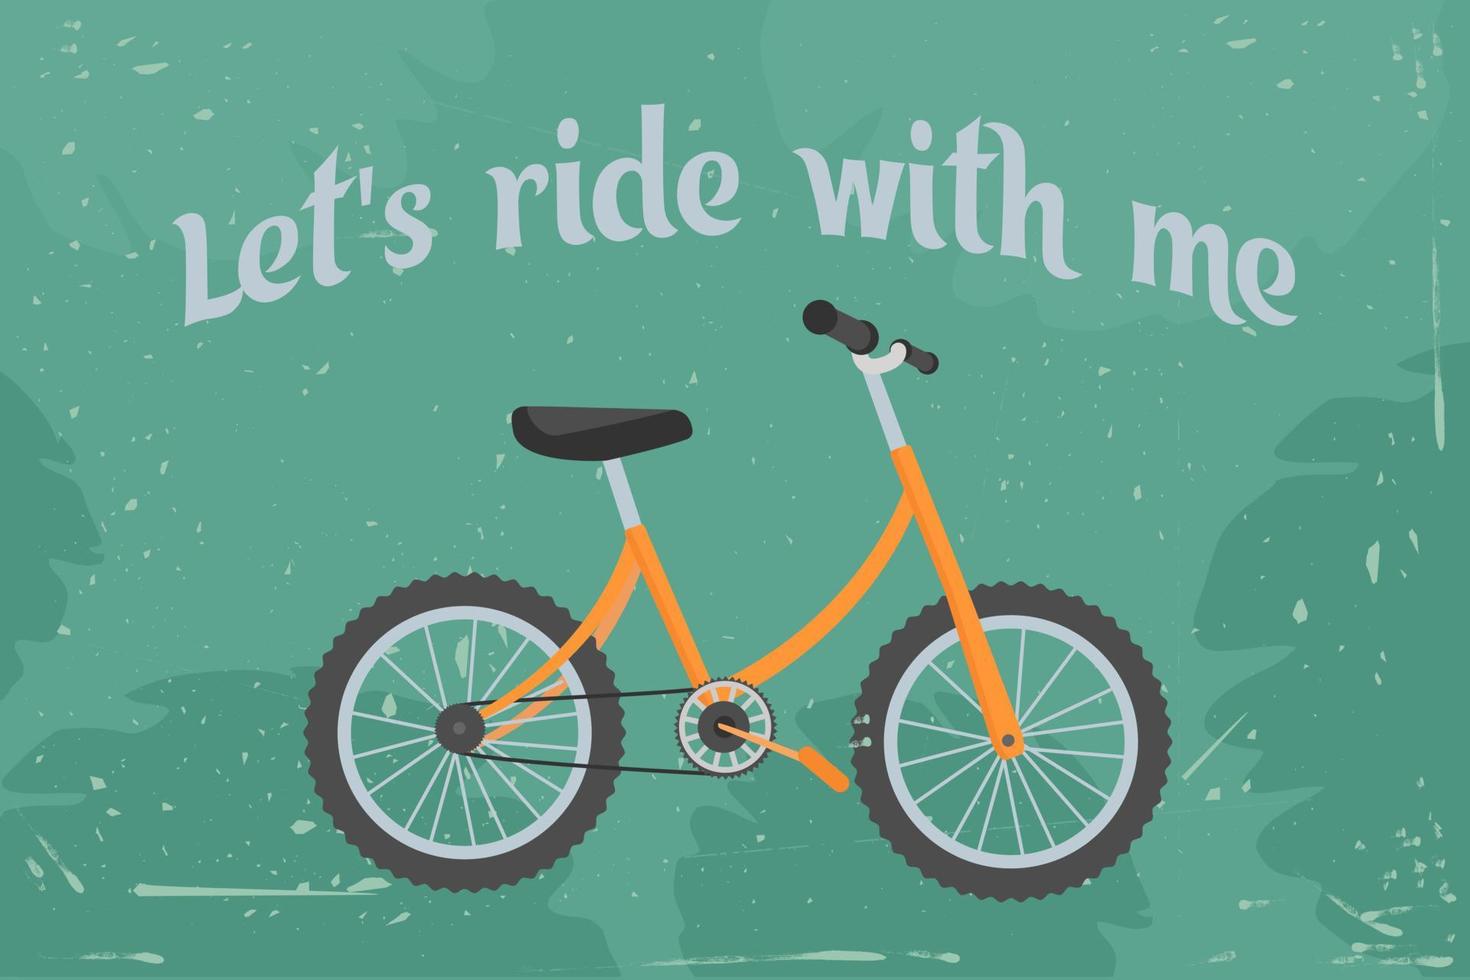 Retro pedal. Ride with a bicycle. Isolated illustration on a colored background. Cartoon style. Vector illustration.